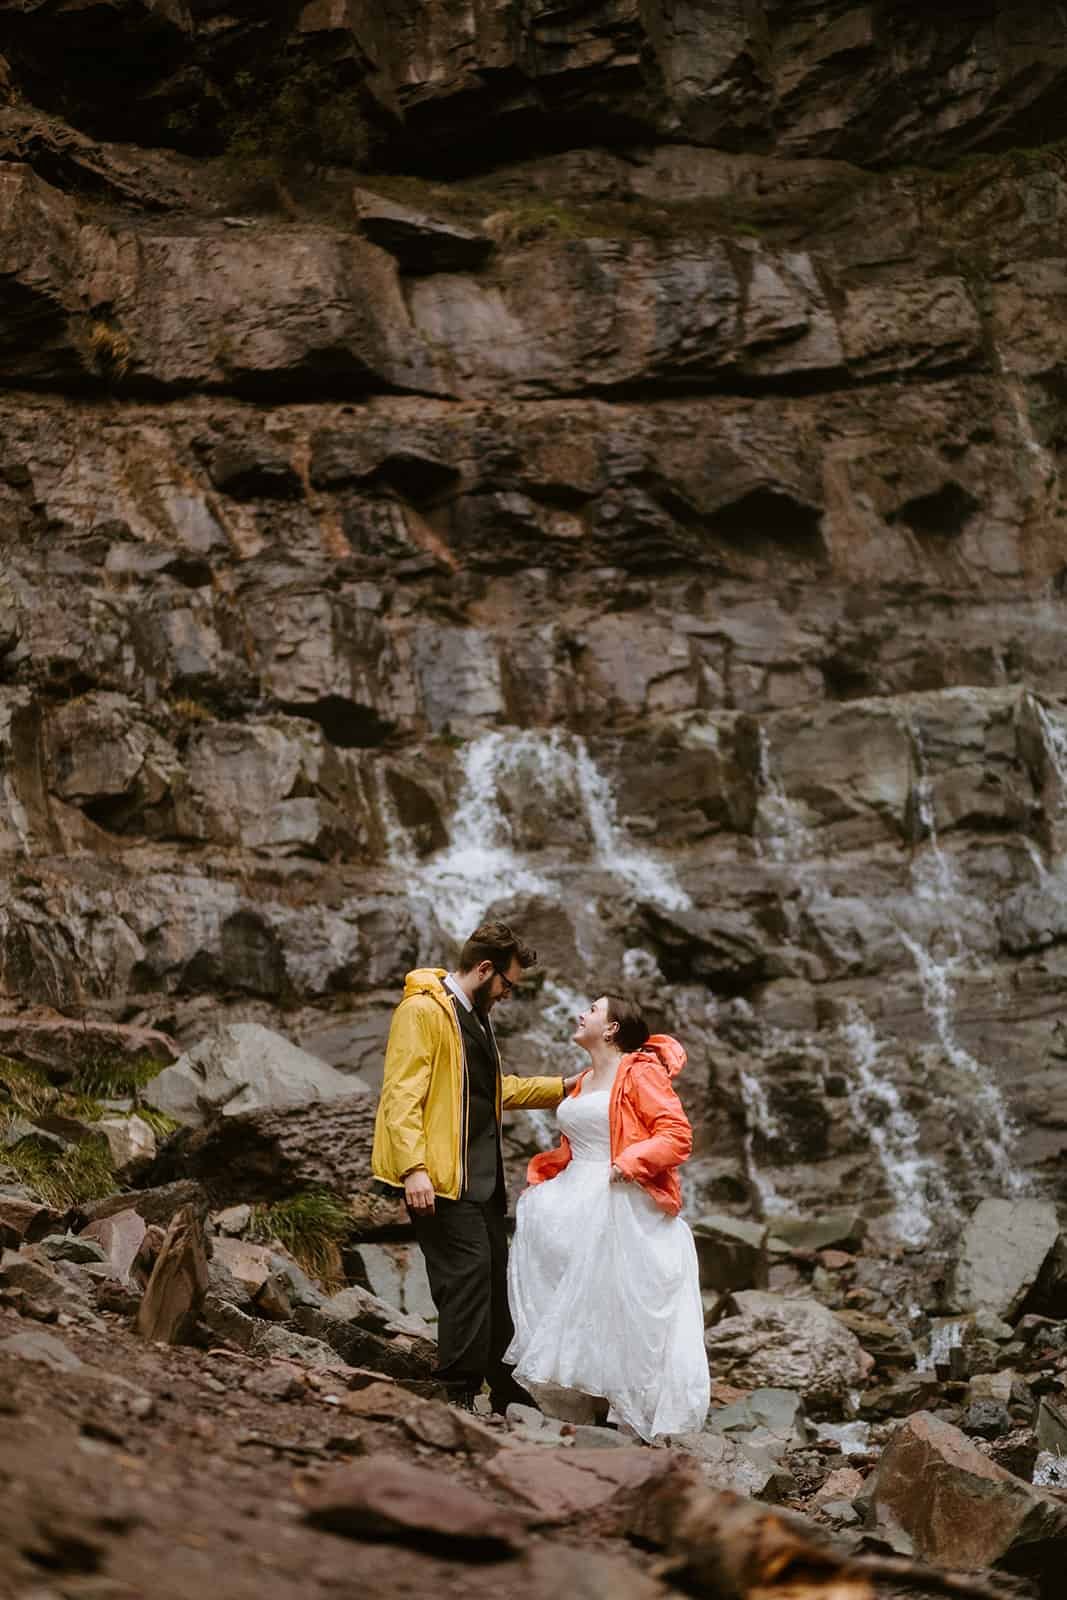 A couple turned around looking at a waterfall in Colorado